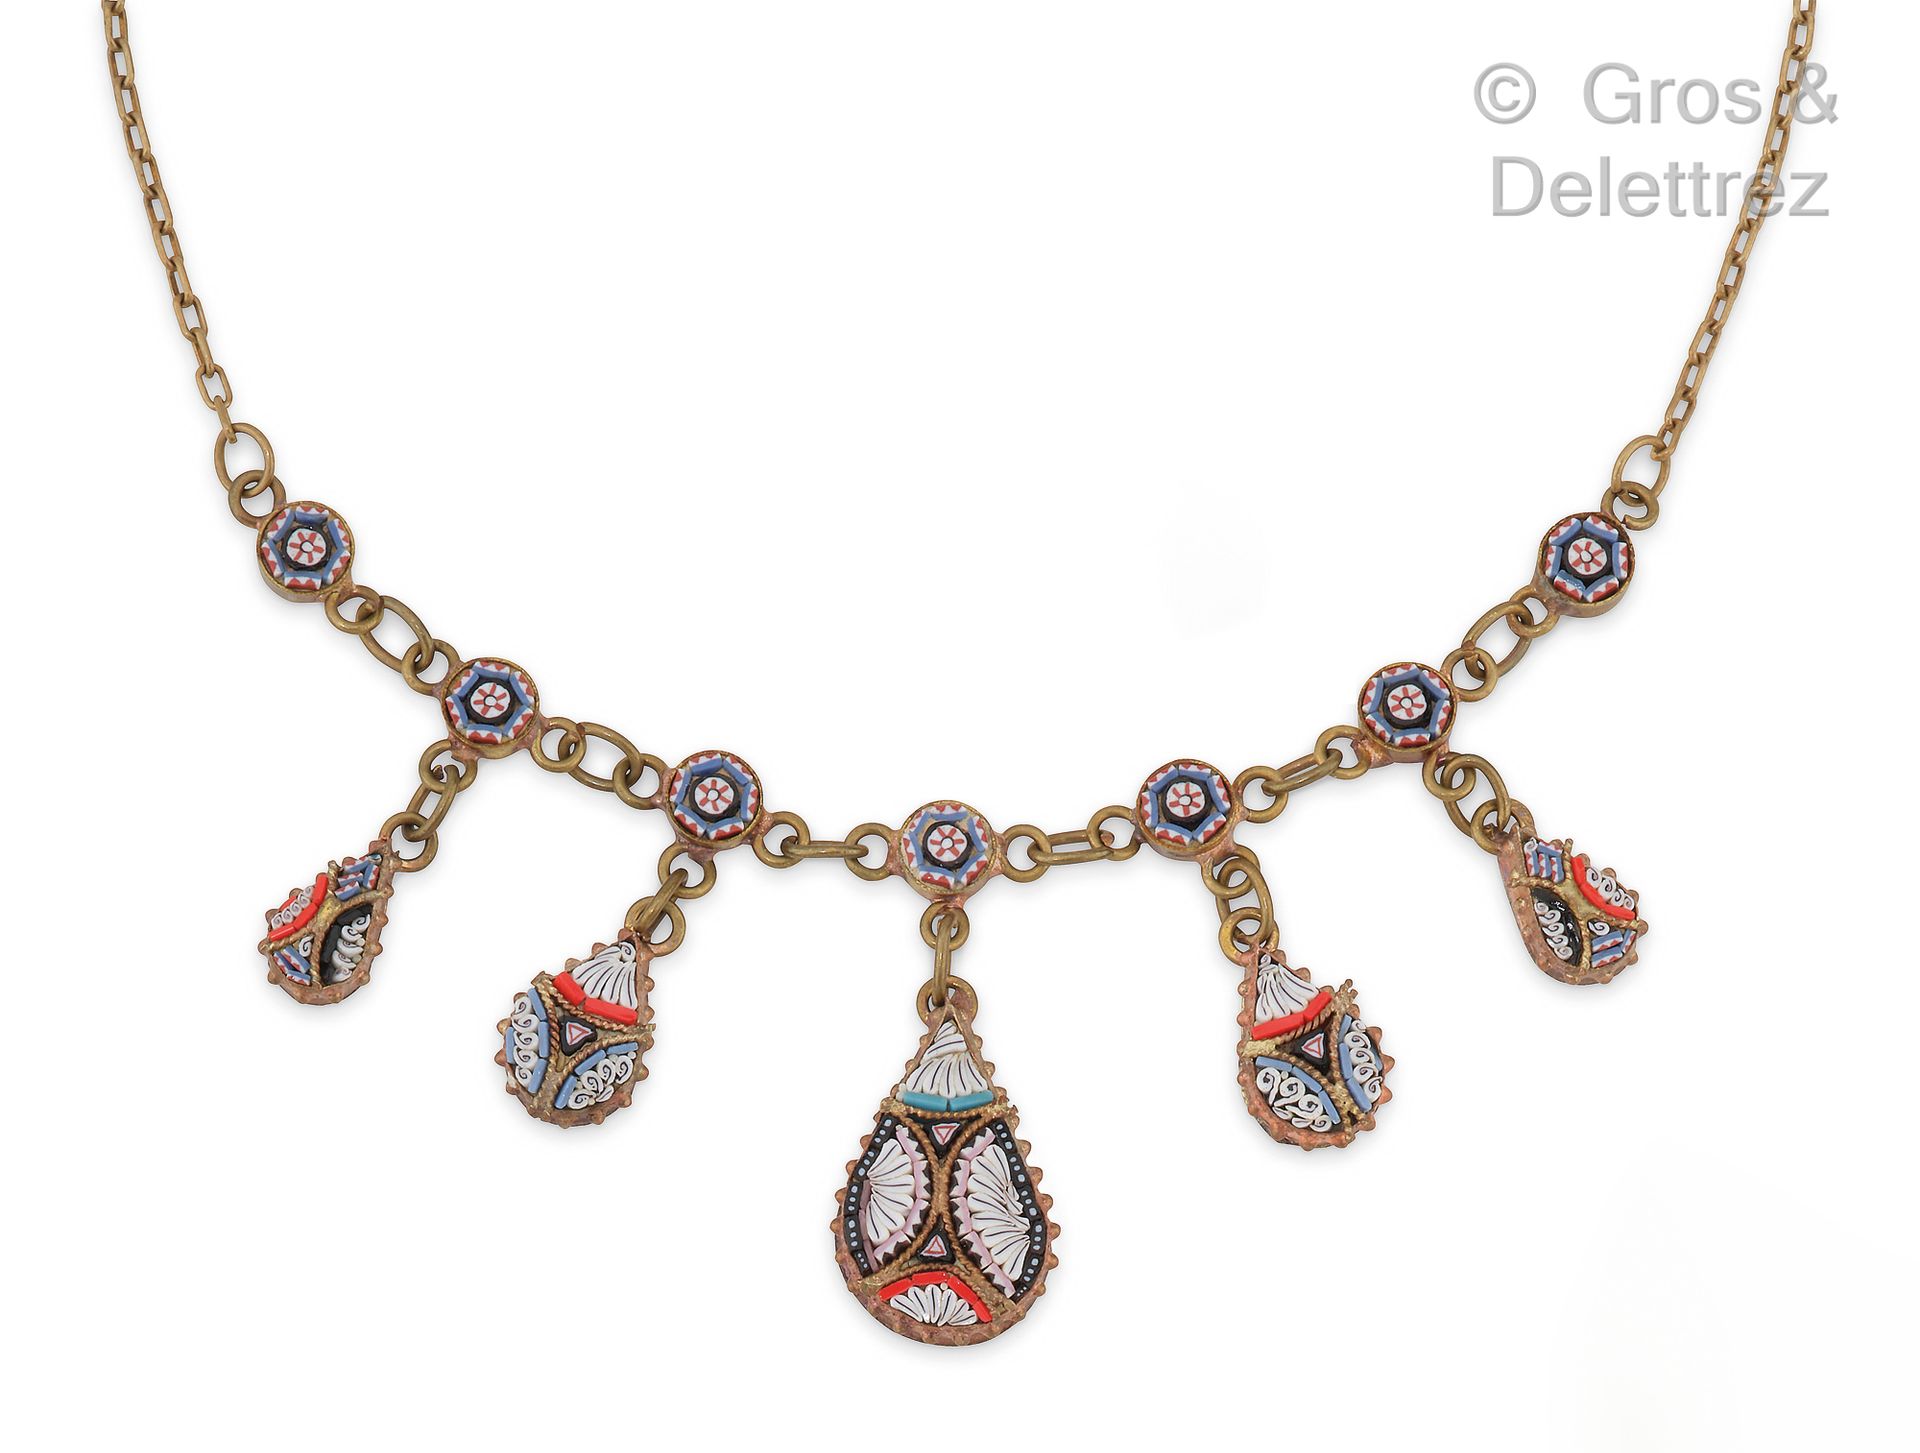 Null Necklace "Collar" in gilded metal with drops set with micro-mosaic. Italian&hellip;